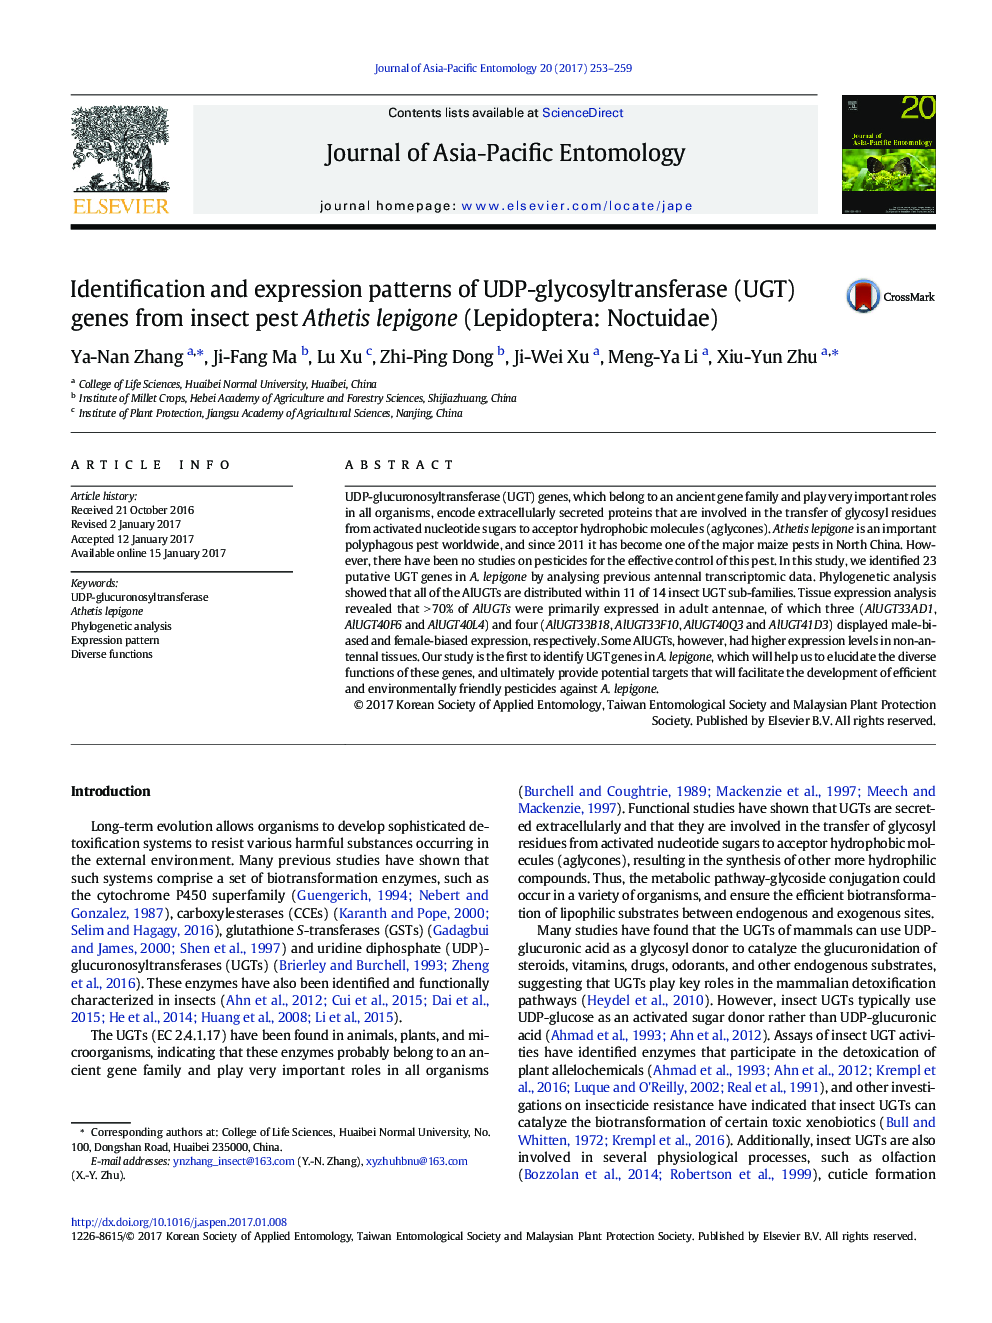 Identification and expression patterns of UDP-glycosyltransferase (UGT) genes from insect pest Athetis lepigone (Lepidoptera: Noctuidae)